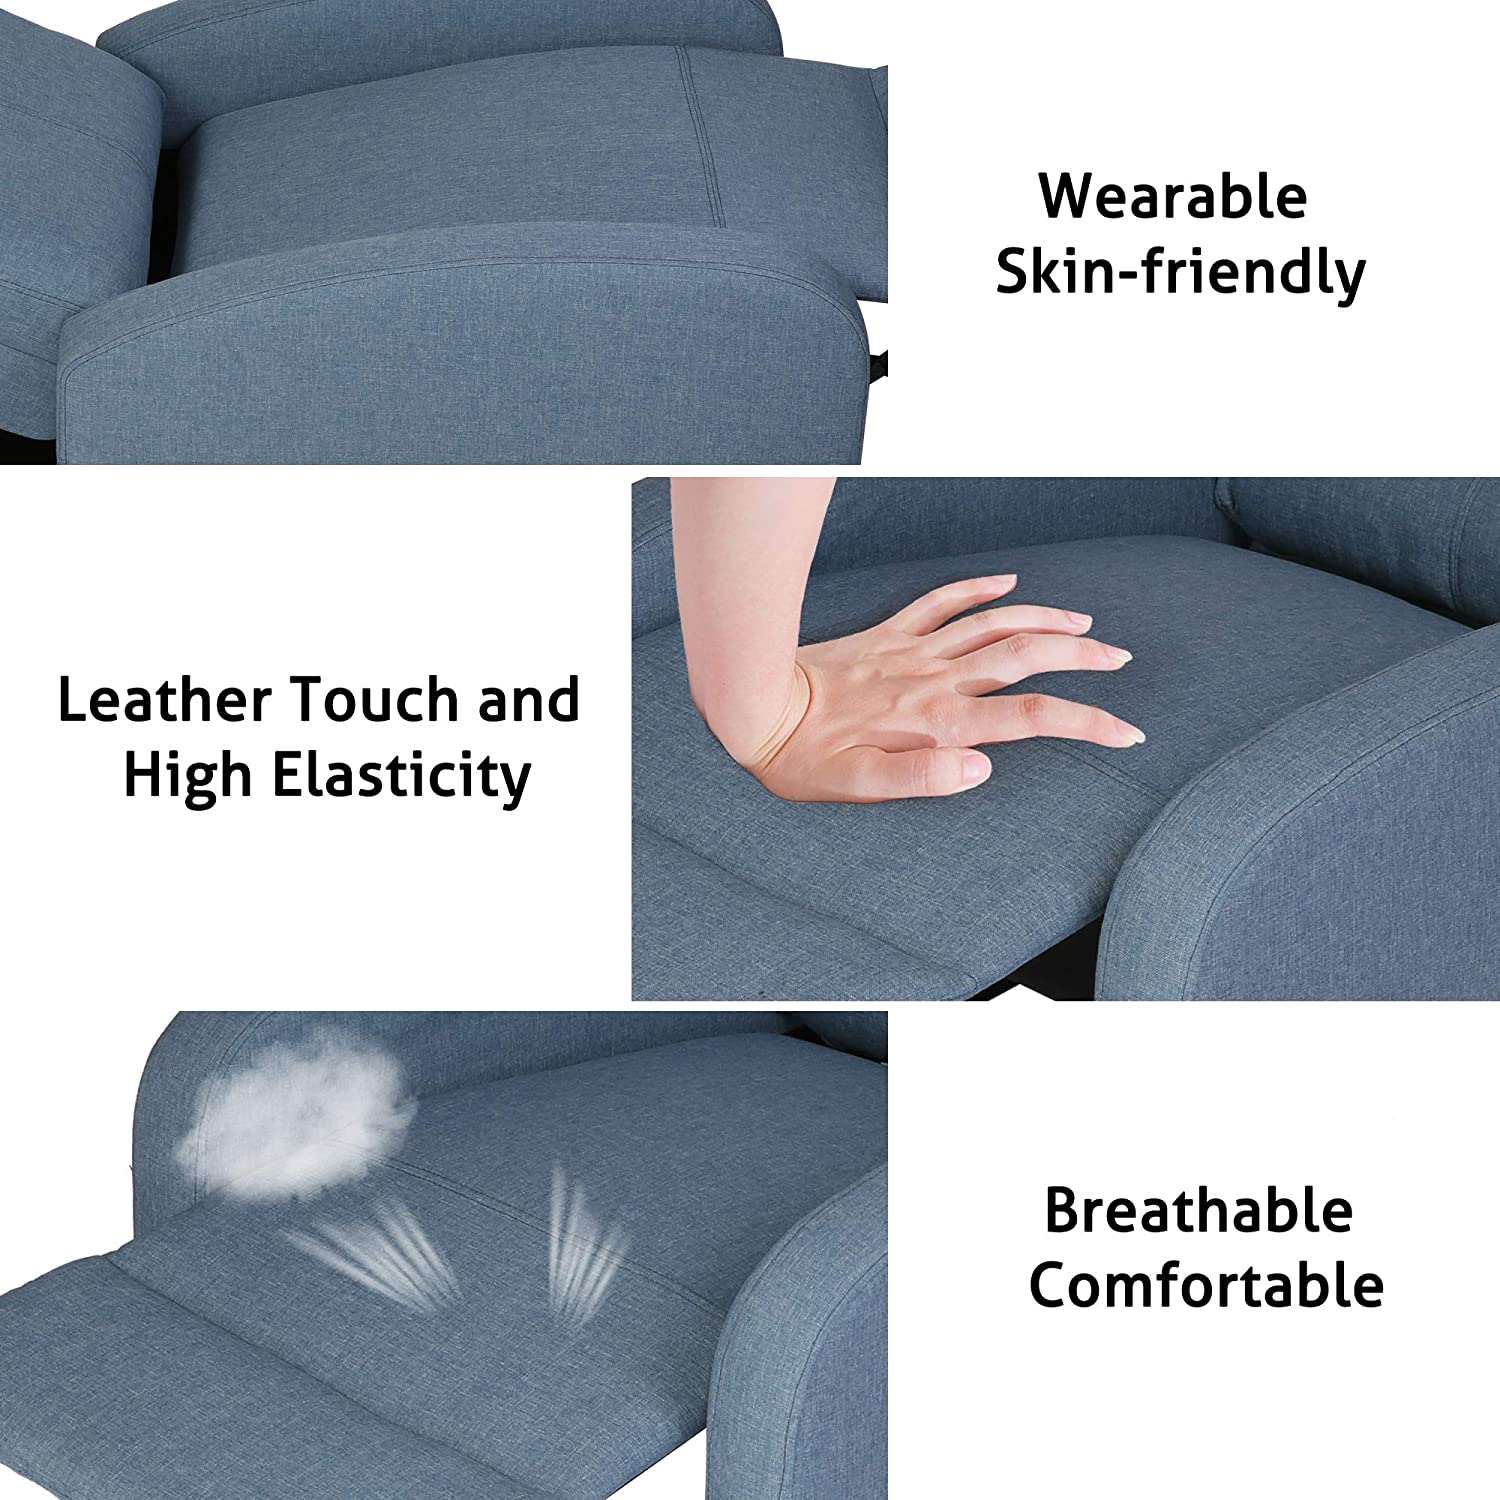 Adjustable Fabric Recliner Chair Ergonomic Recliner Sofa Easy Assemble Padded Seat Assemble w/Thick Cushion & Backrest Modern for Living Room Home Theater Bedroom